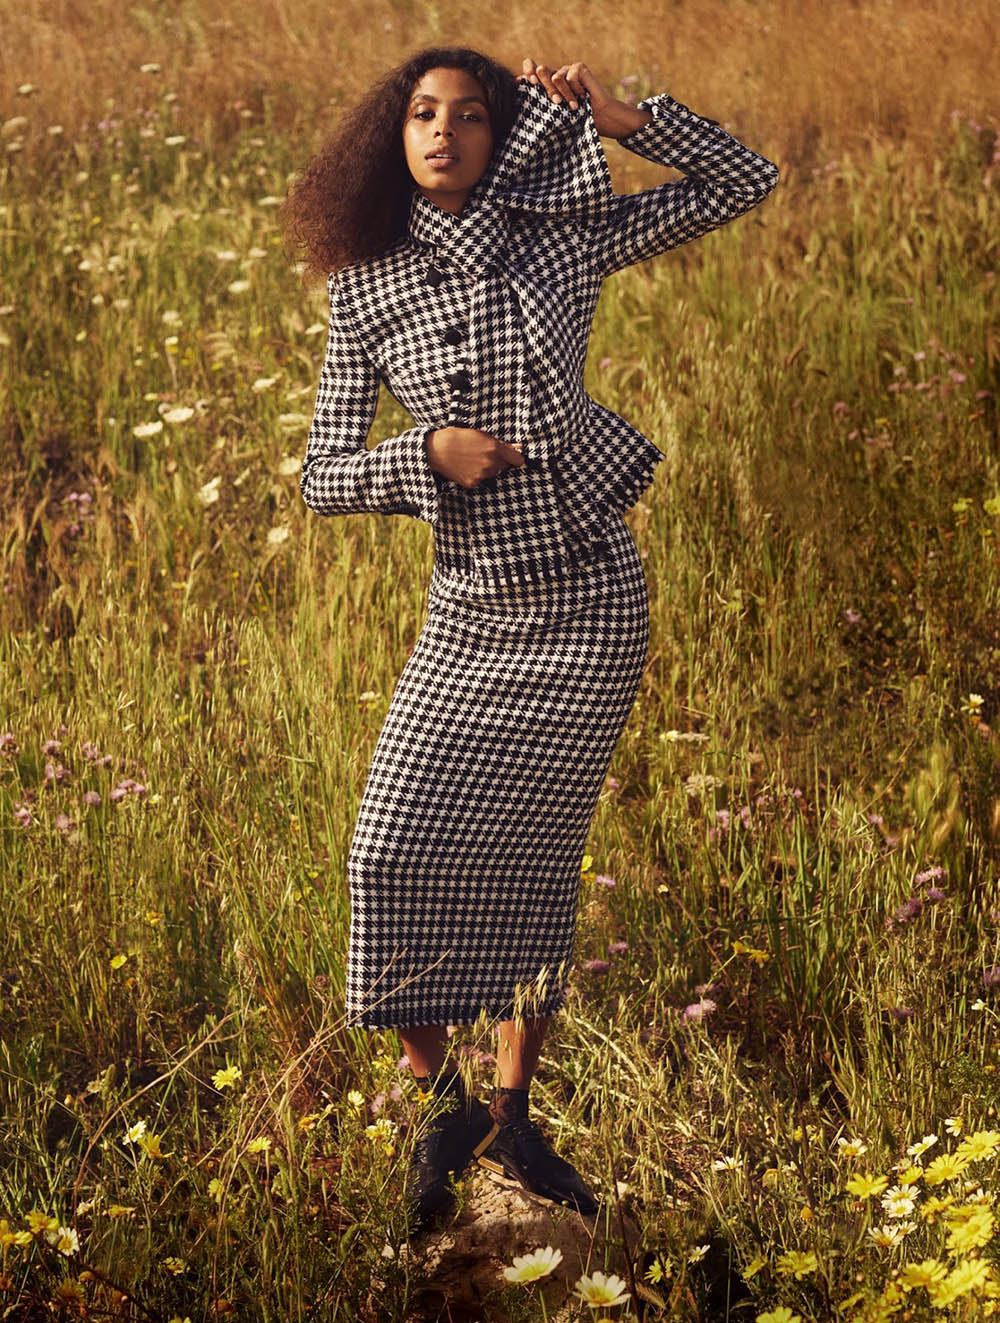 Alyssa Traore by Laura Sciacovelli for Elle UK August 2019